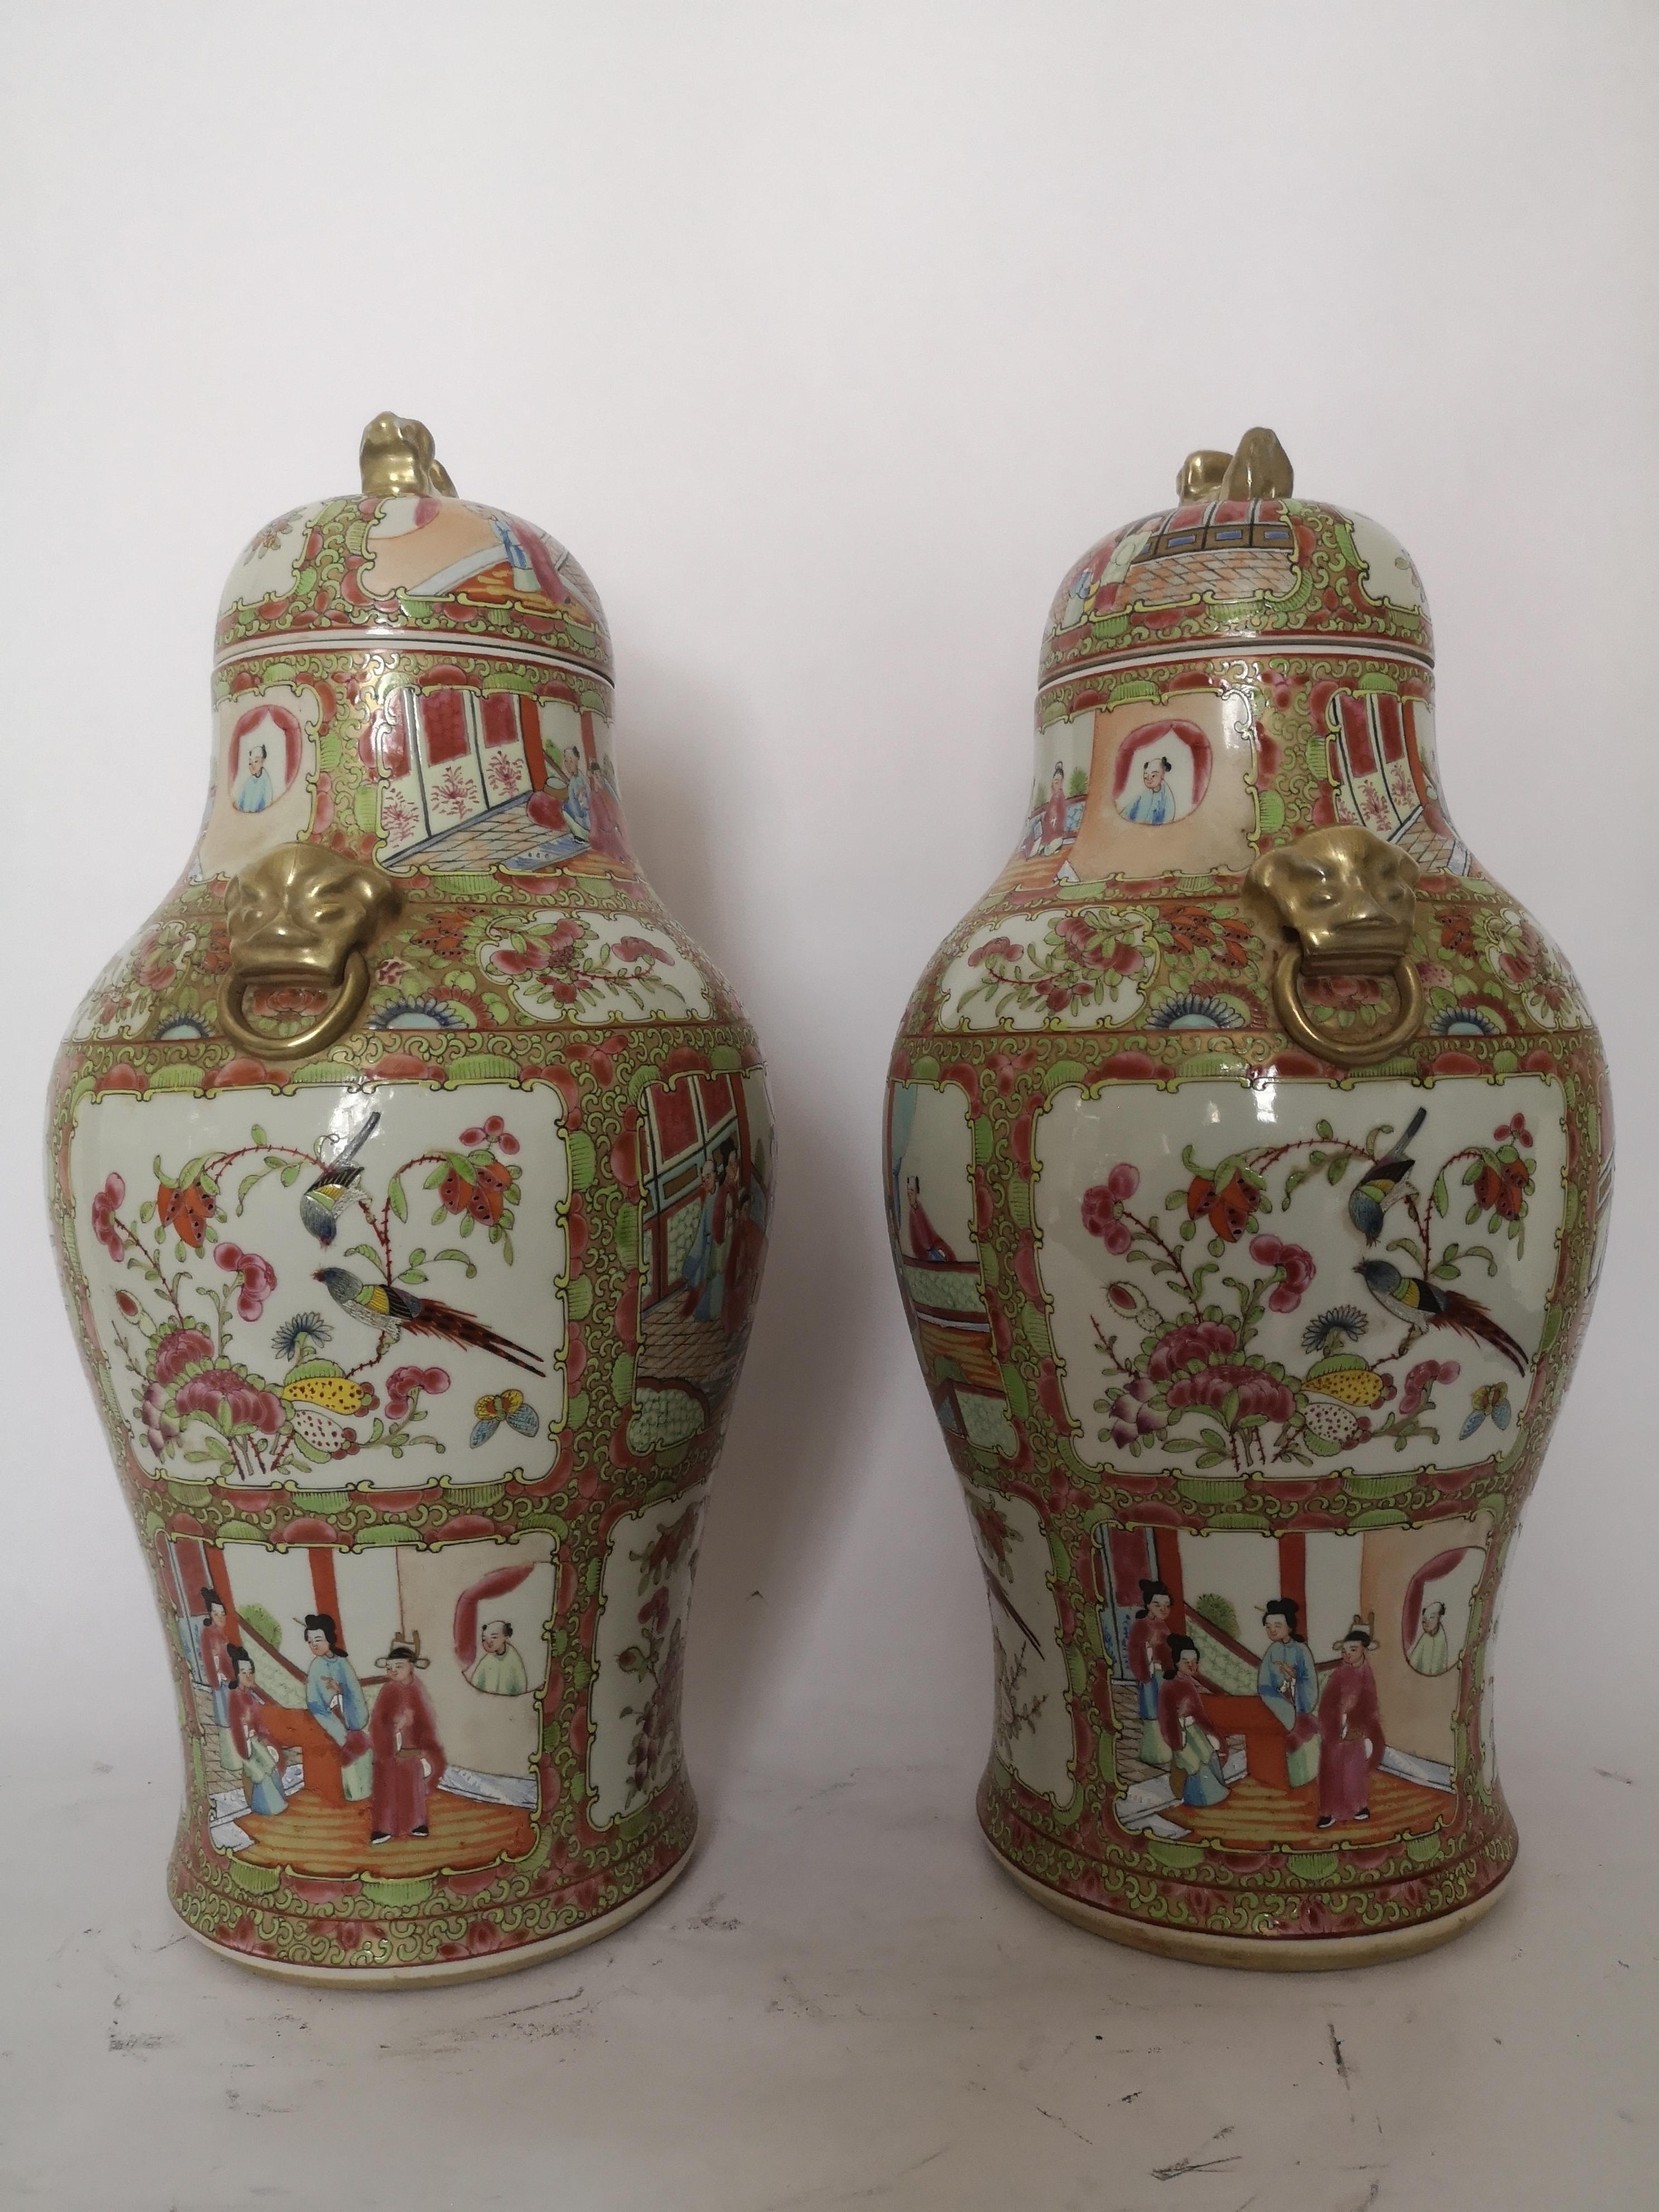 A good pair of Chinese porcelain vases from the canton region and decorated in the famille rose pattern. Of baluster form and decorated figures, birds, flowers and butterflies.
Chinese, 1900.